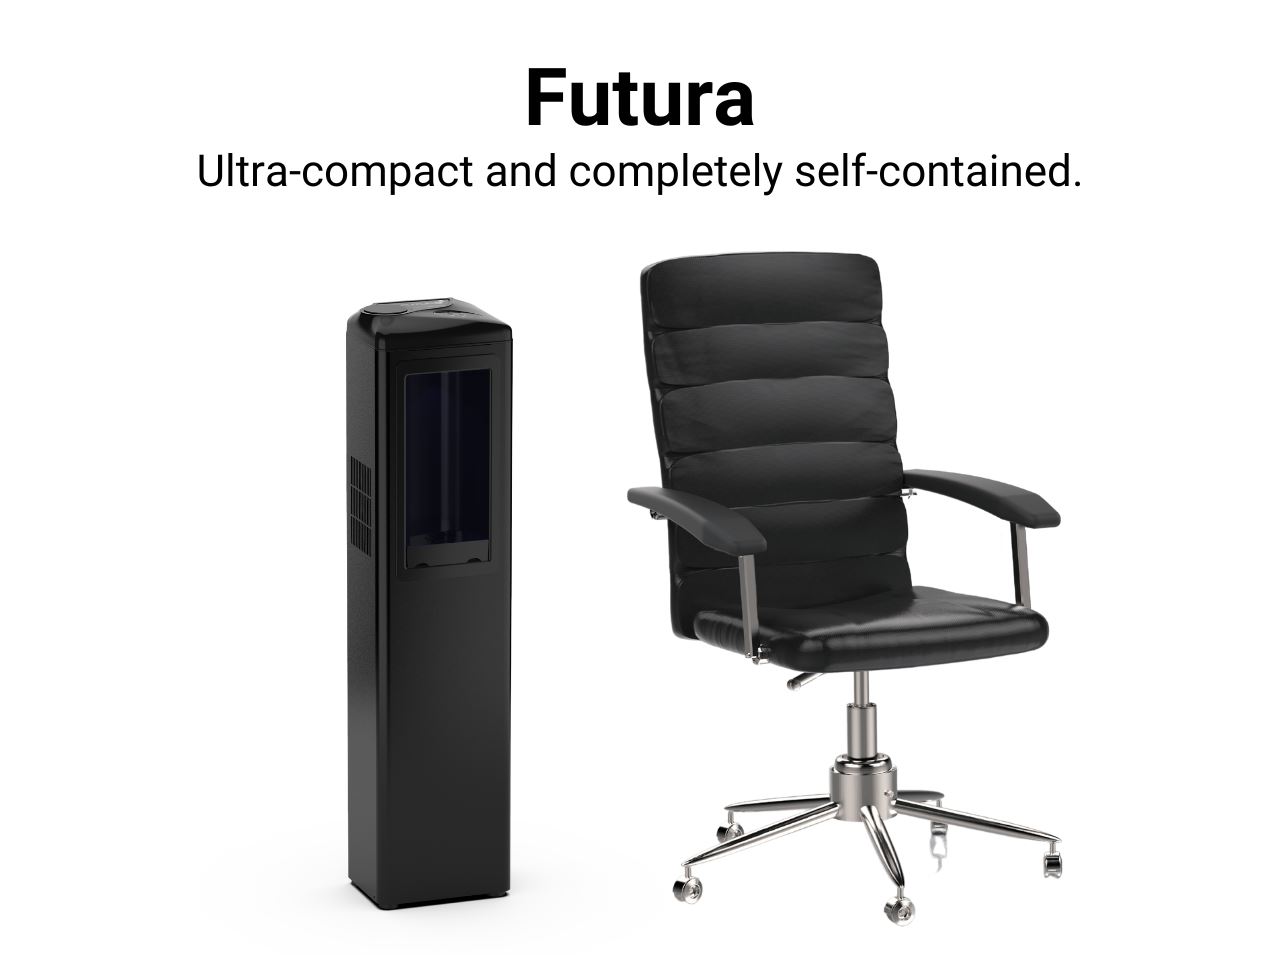 Futura
Ultra-compact and completely self-contained